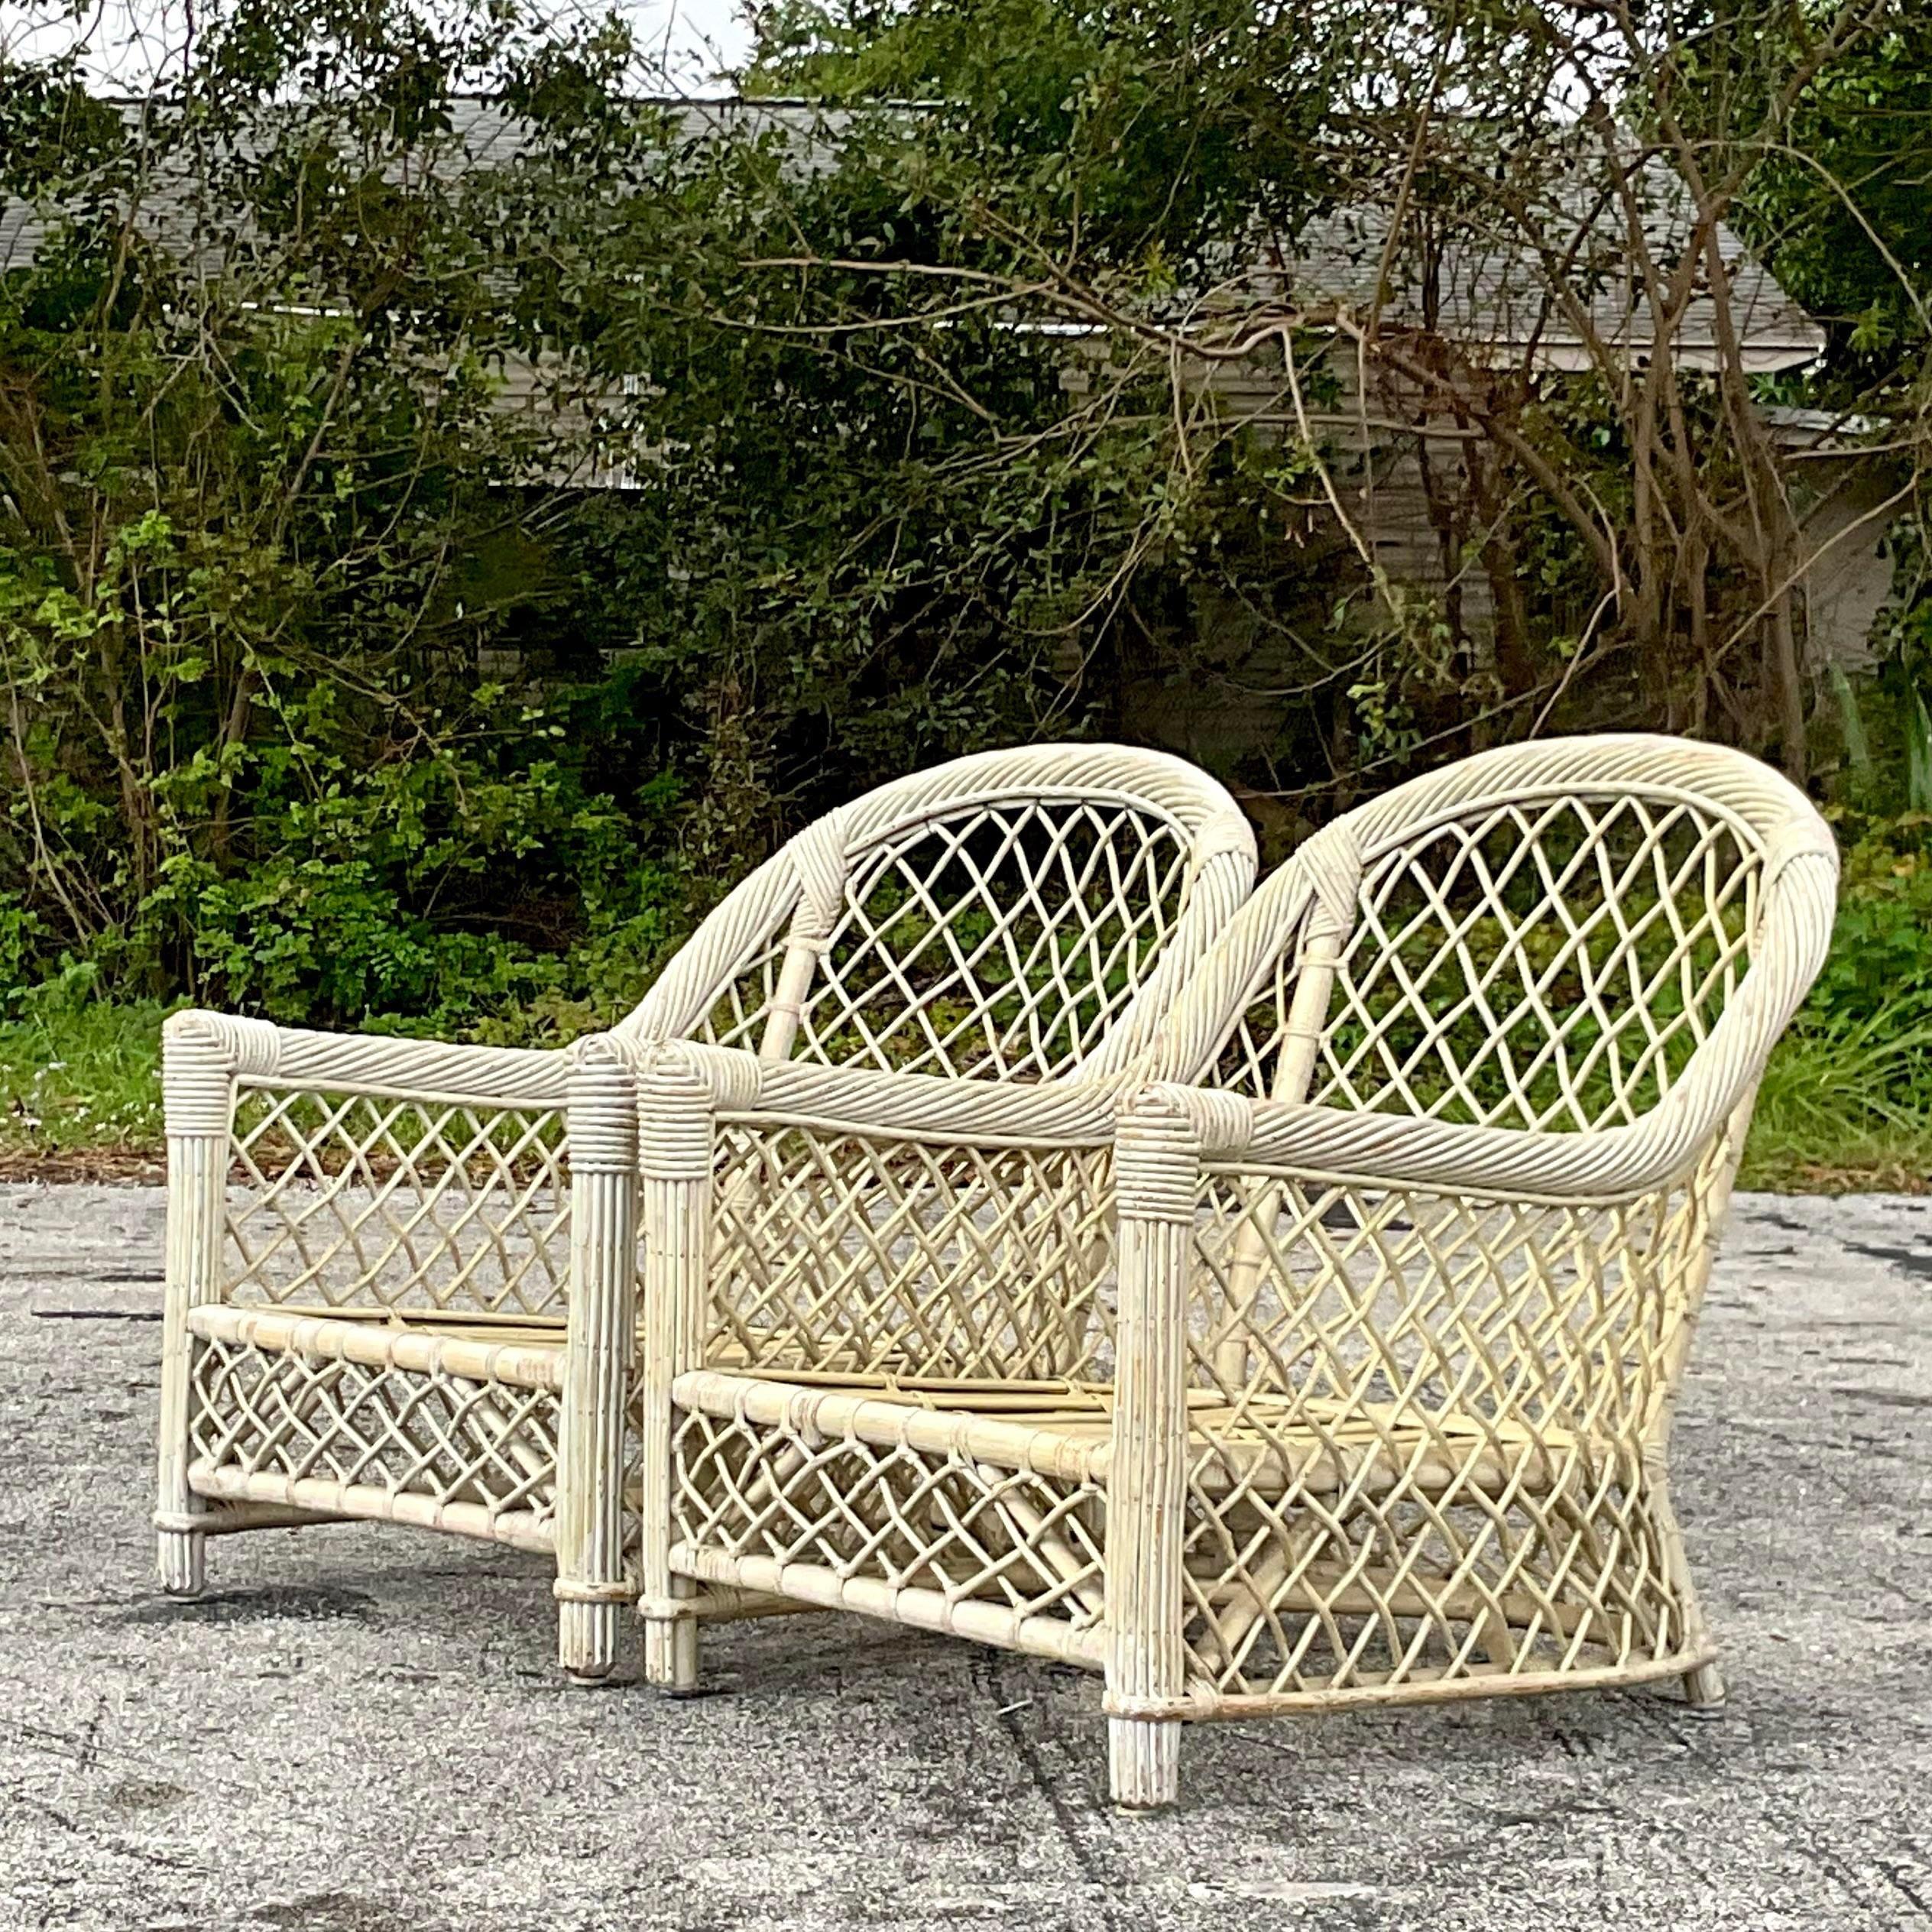 Mid 20th Century Vintage Coastal Trellis Rattan Lounge Chairs - a Pair In Good Condition For Sale In west palm beach, FL